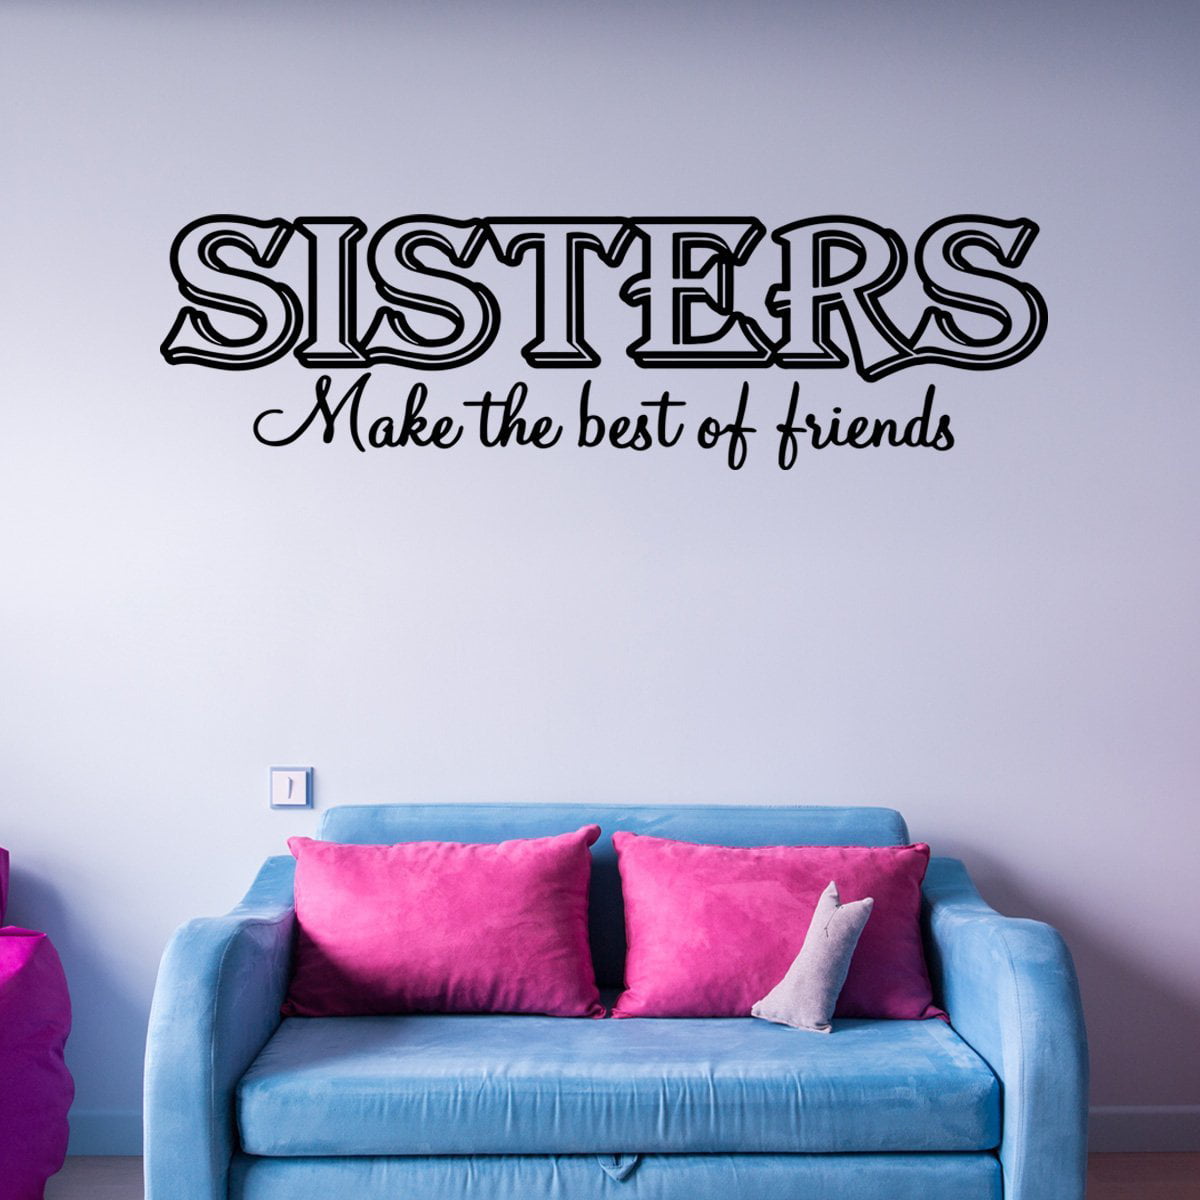 Bless this home with Friends vinyl wall decal quote sticker decor Inspirational 